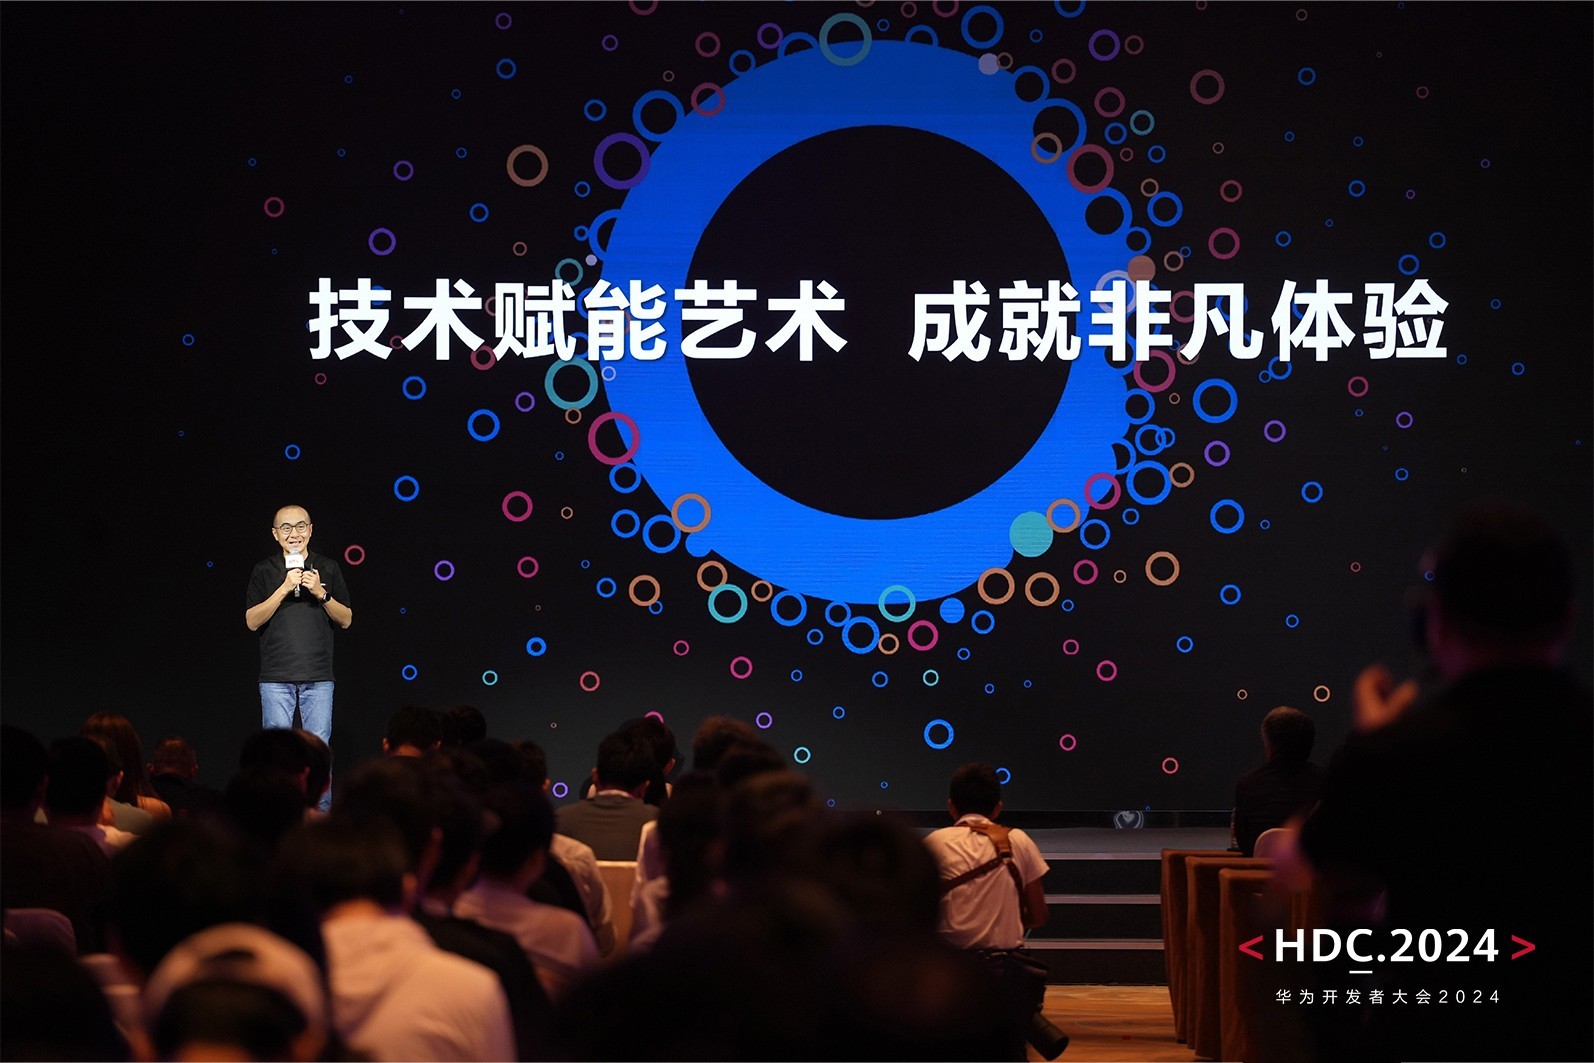  Hongmeng re evolved, and the commercialization process of native games accelerated